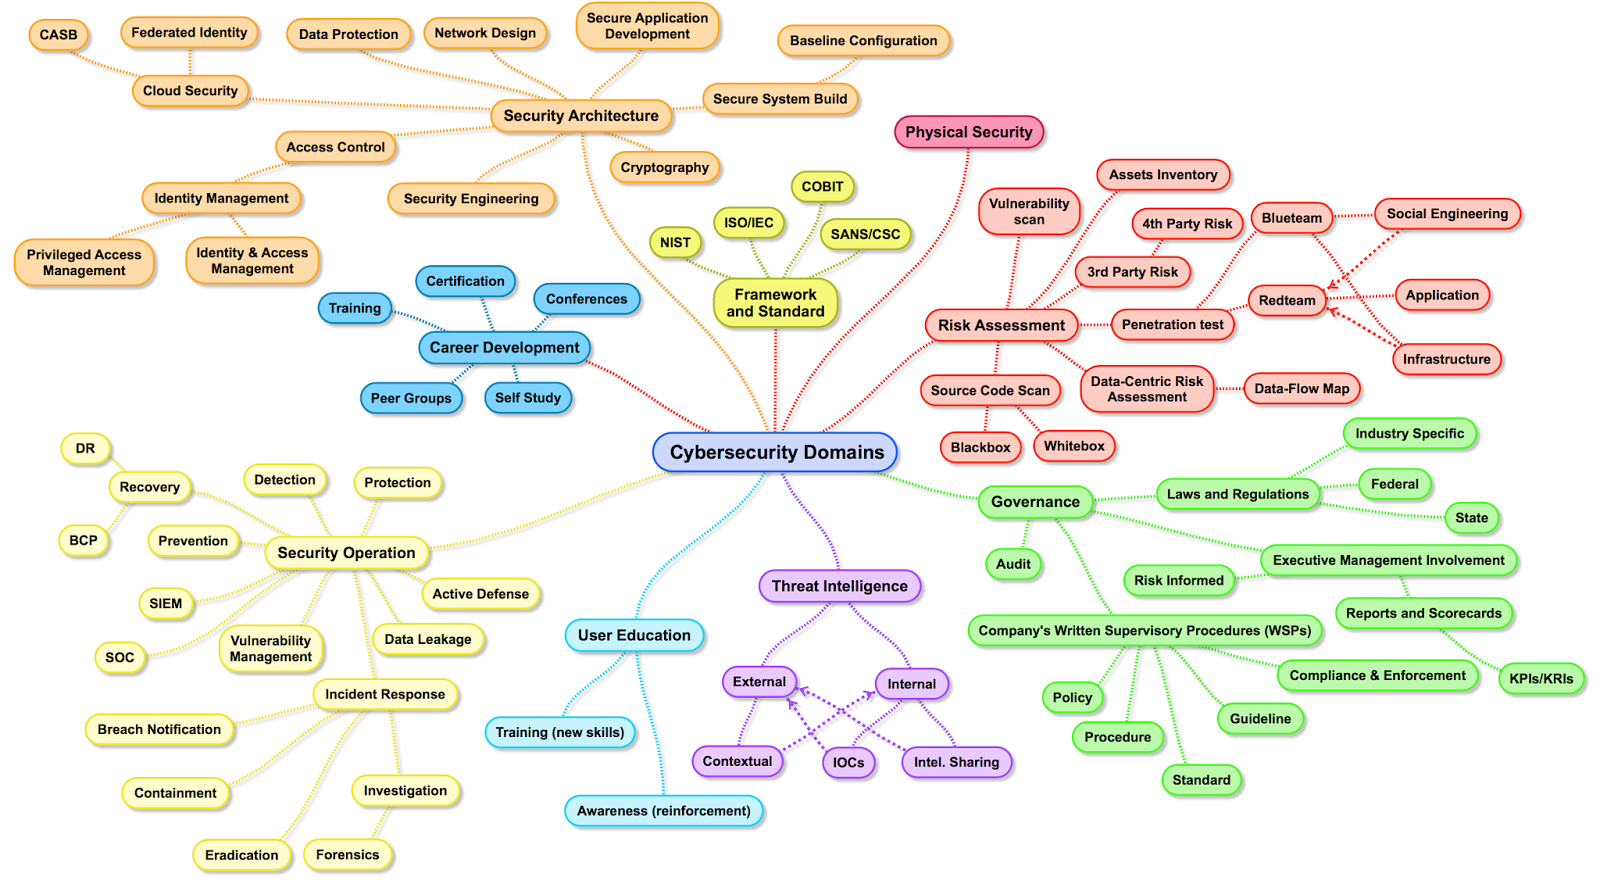 TaoSecurity: Cybersecurity Domains Mind Map